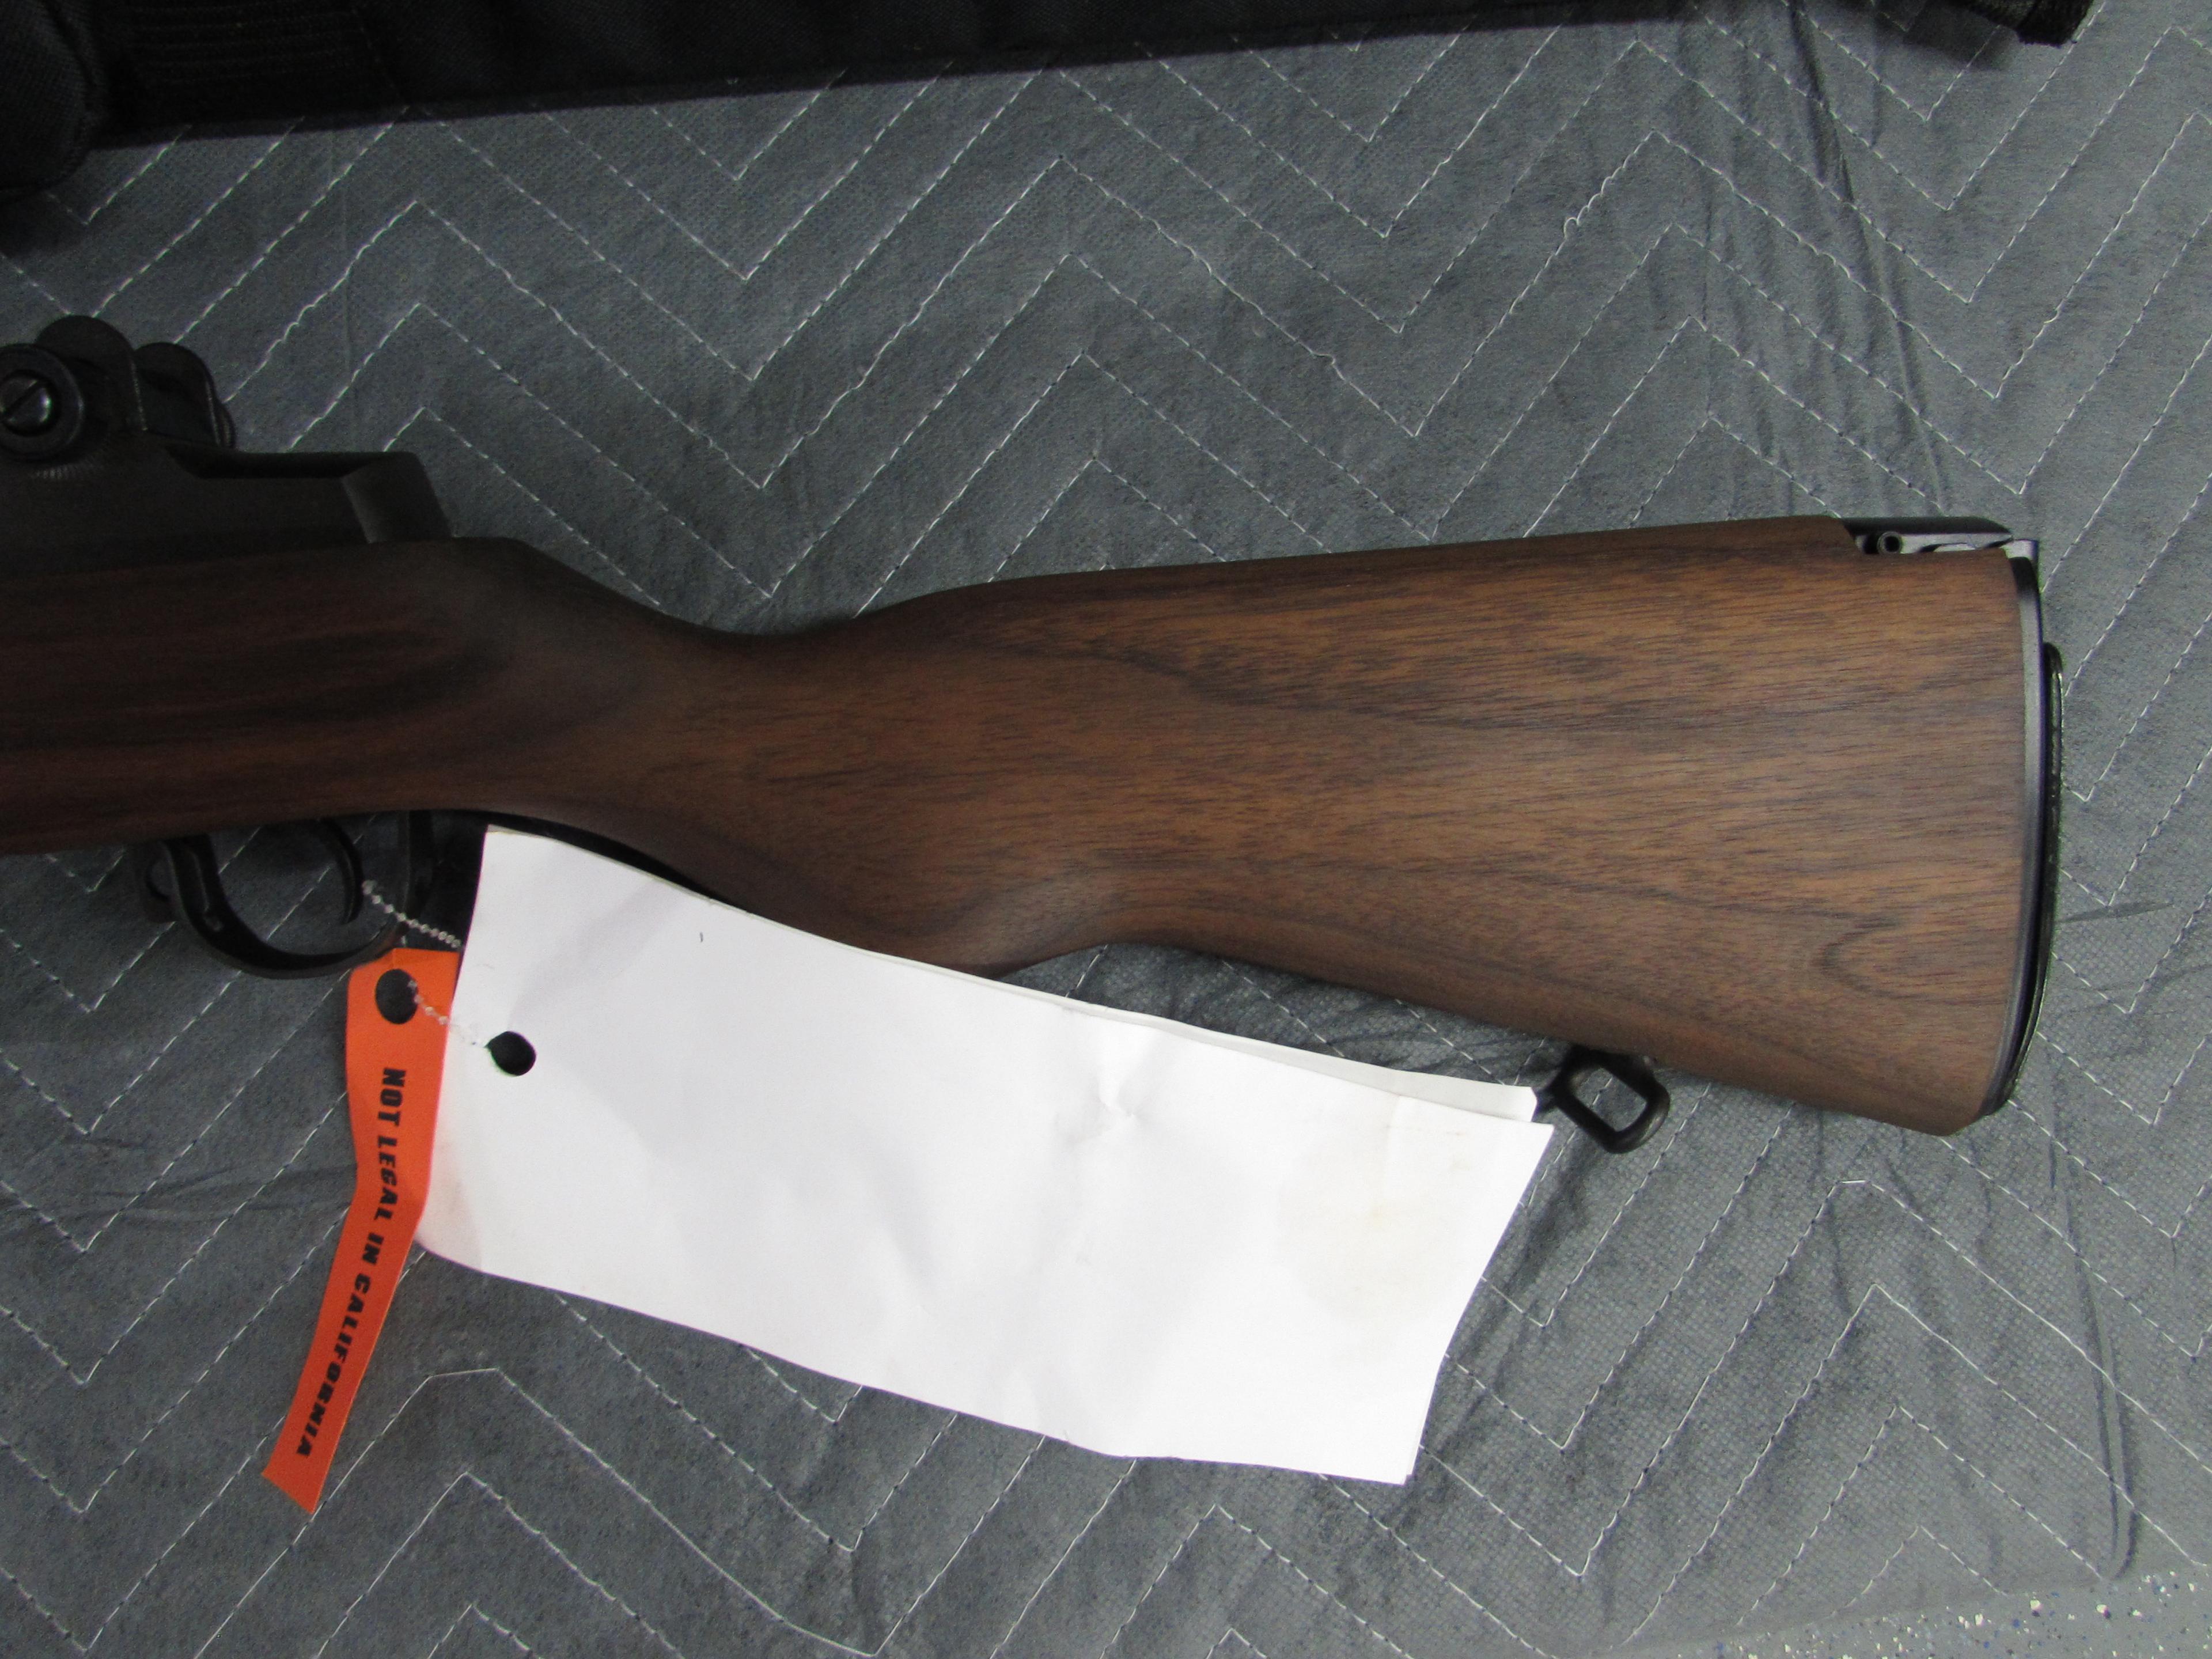 Springfield Armory M1A National Match